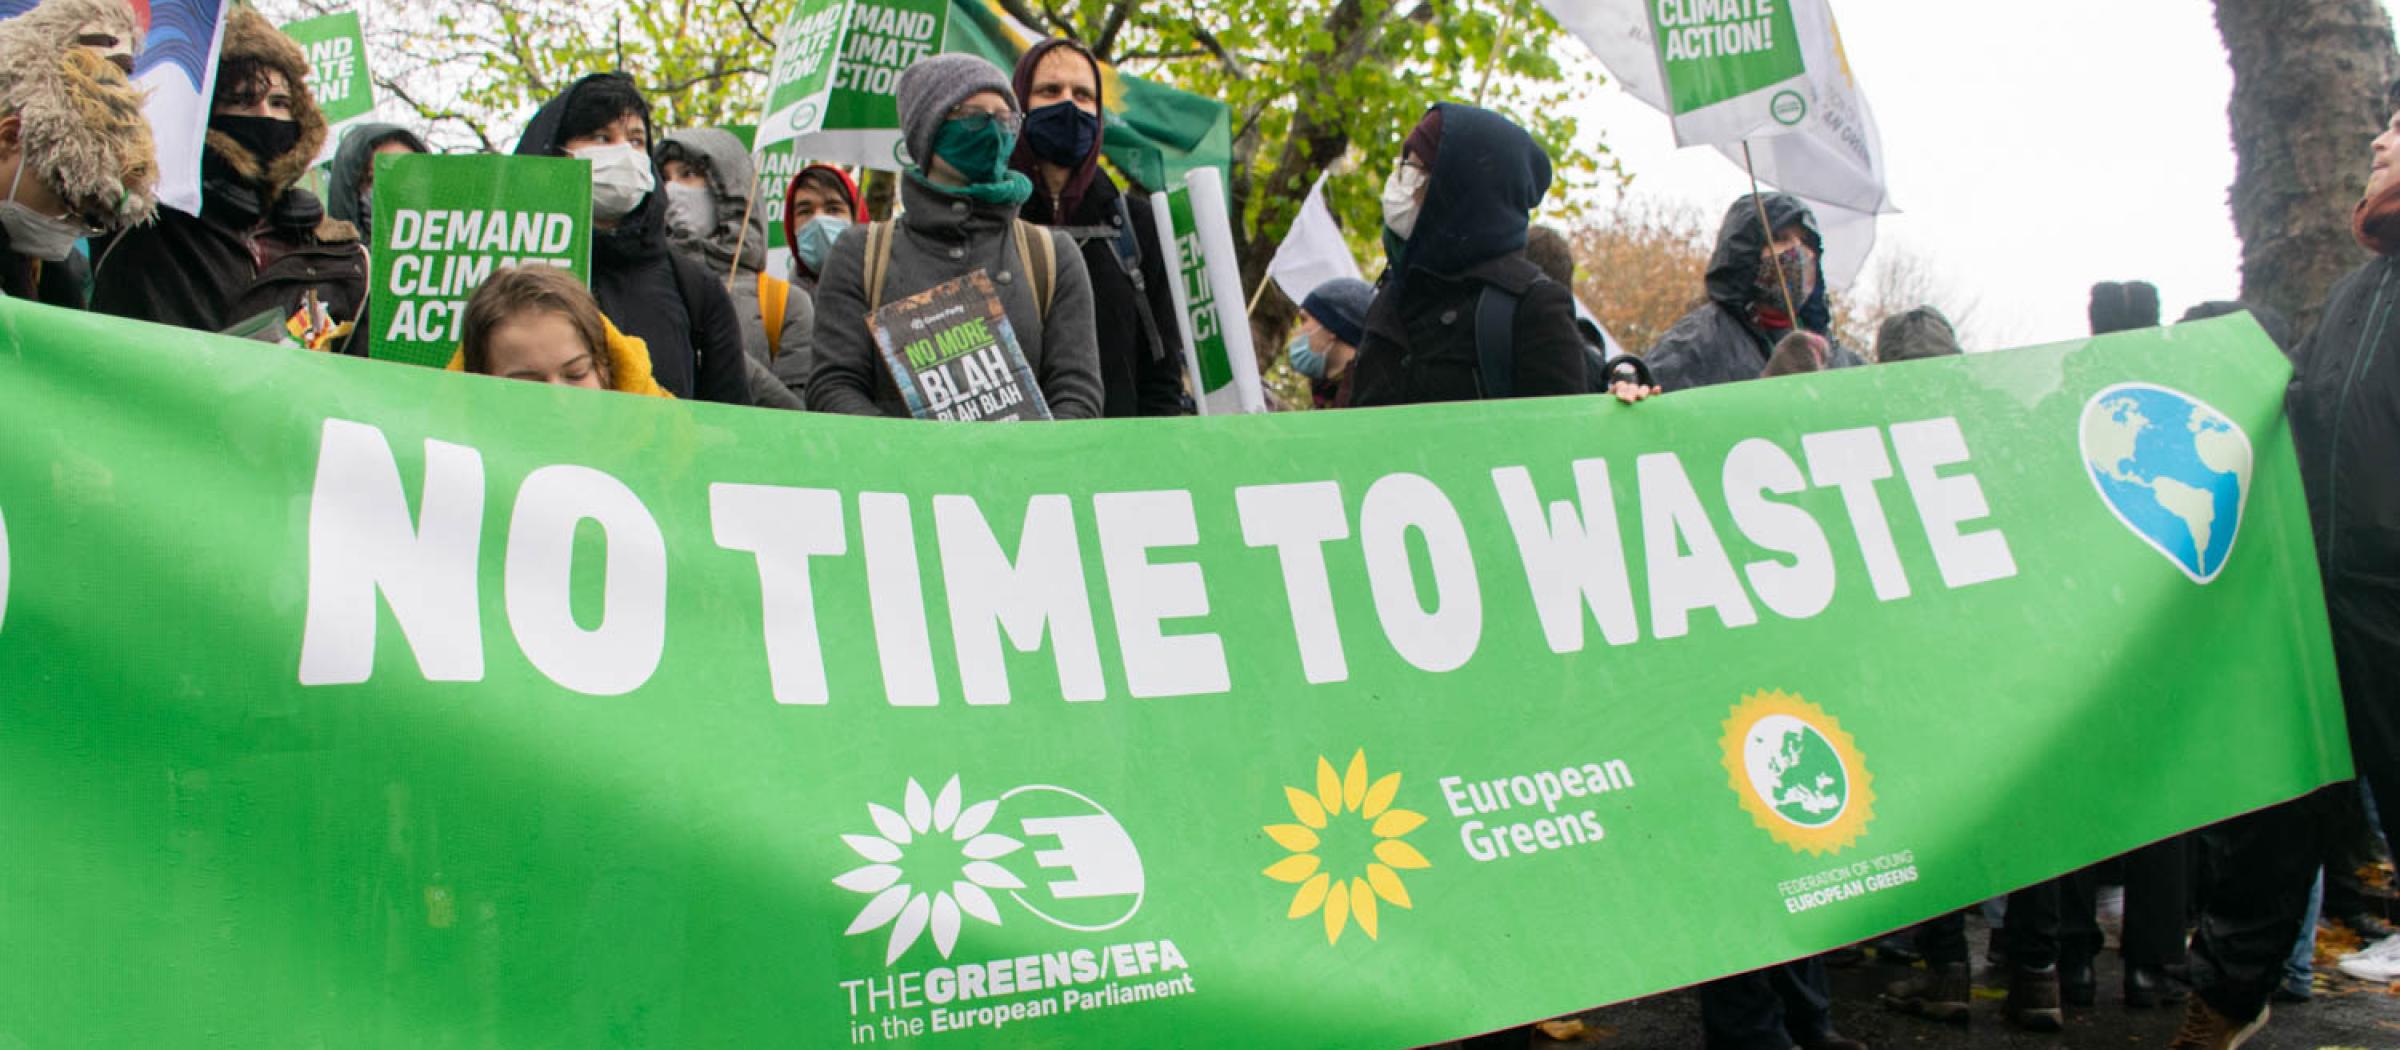 The European Green Party matches at COP26 in Glagow, November 2021